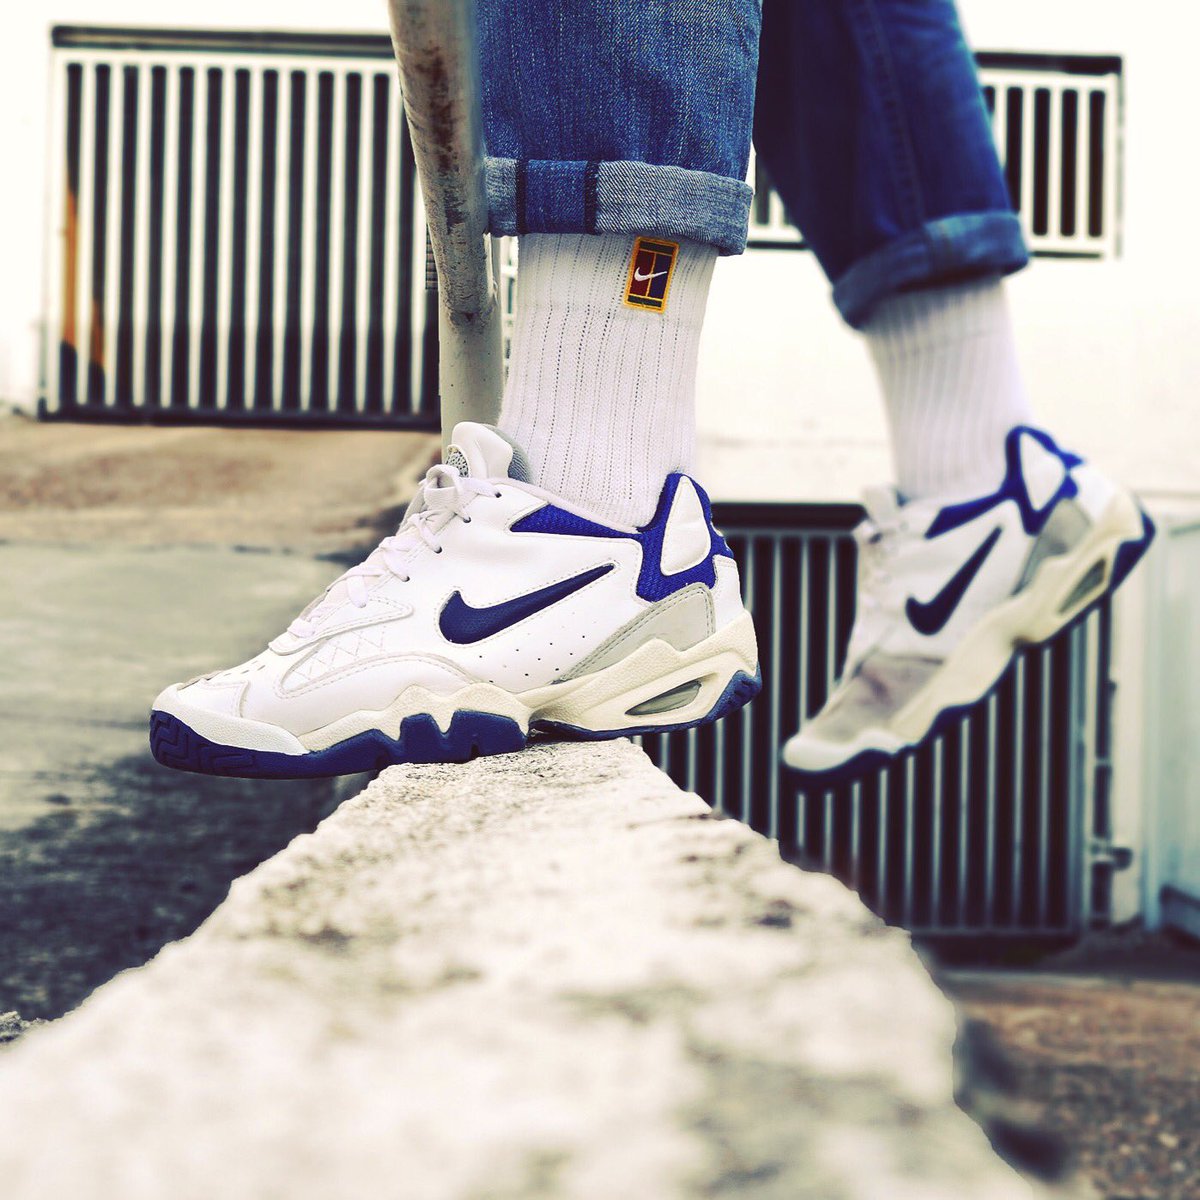 marxismo Prevención Visión general Throwback Sneakers on Twitter: "1994 Nike Air Resistance I on  @Throwbacksnks Feet - NOT FOR SALE The Nike Air Resistance focused on  durability and were unbreakable. https://t.co/3c0WnAB4Ih" / Twitter